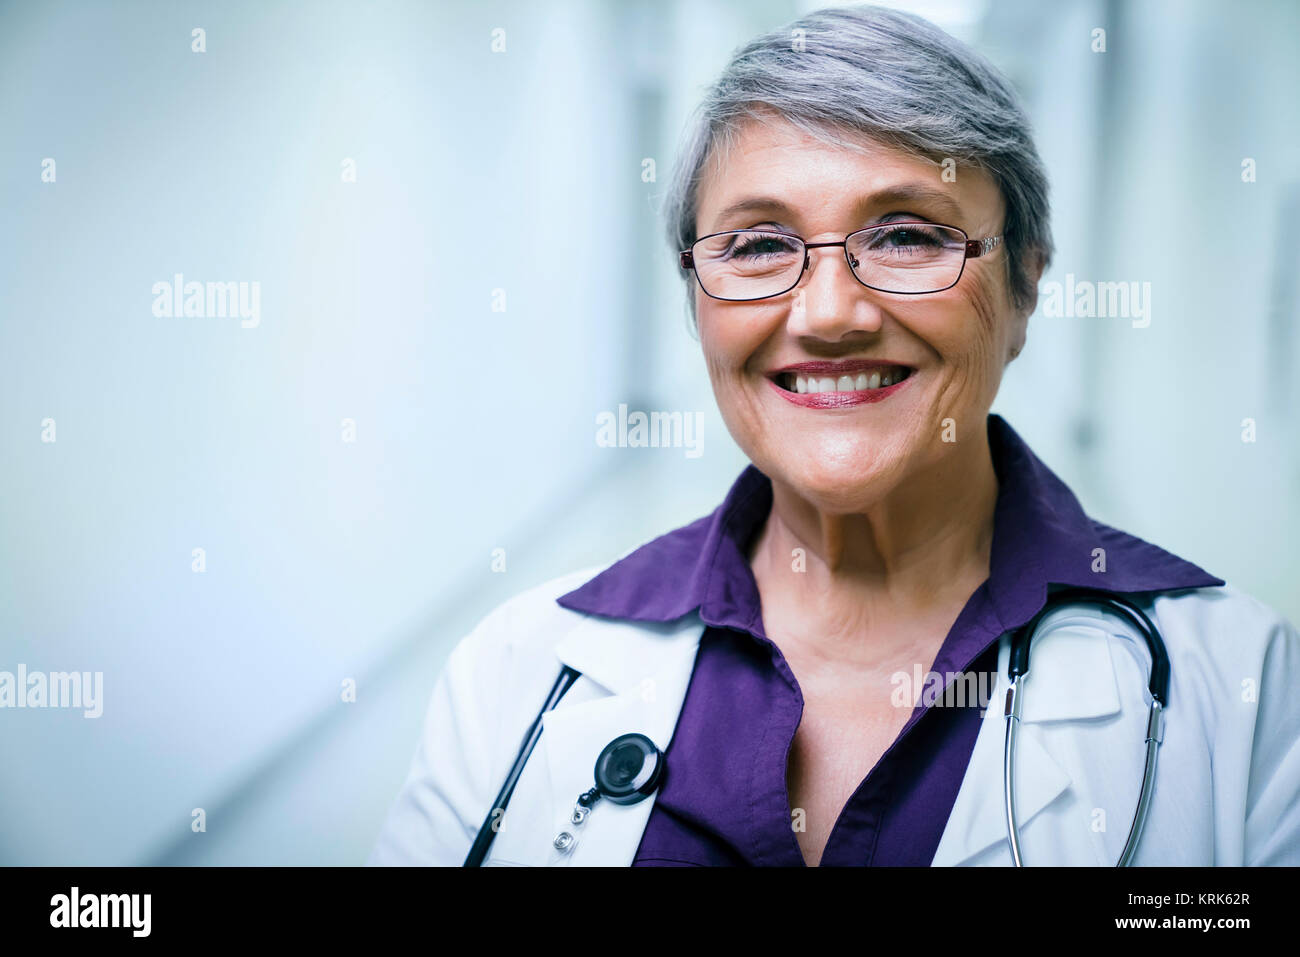 Portrait of smiling mixed race doctor Stock Photo